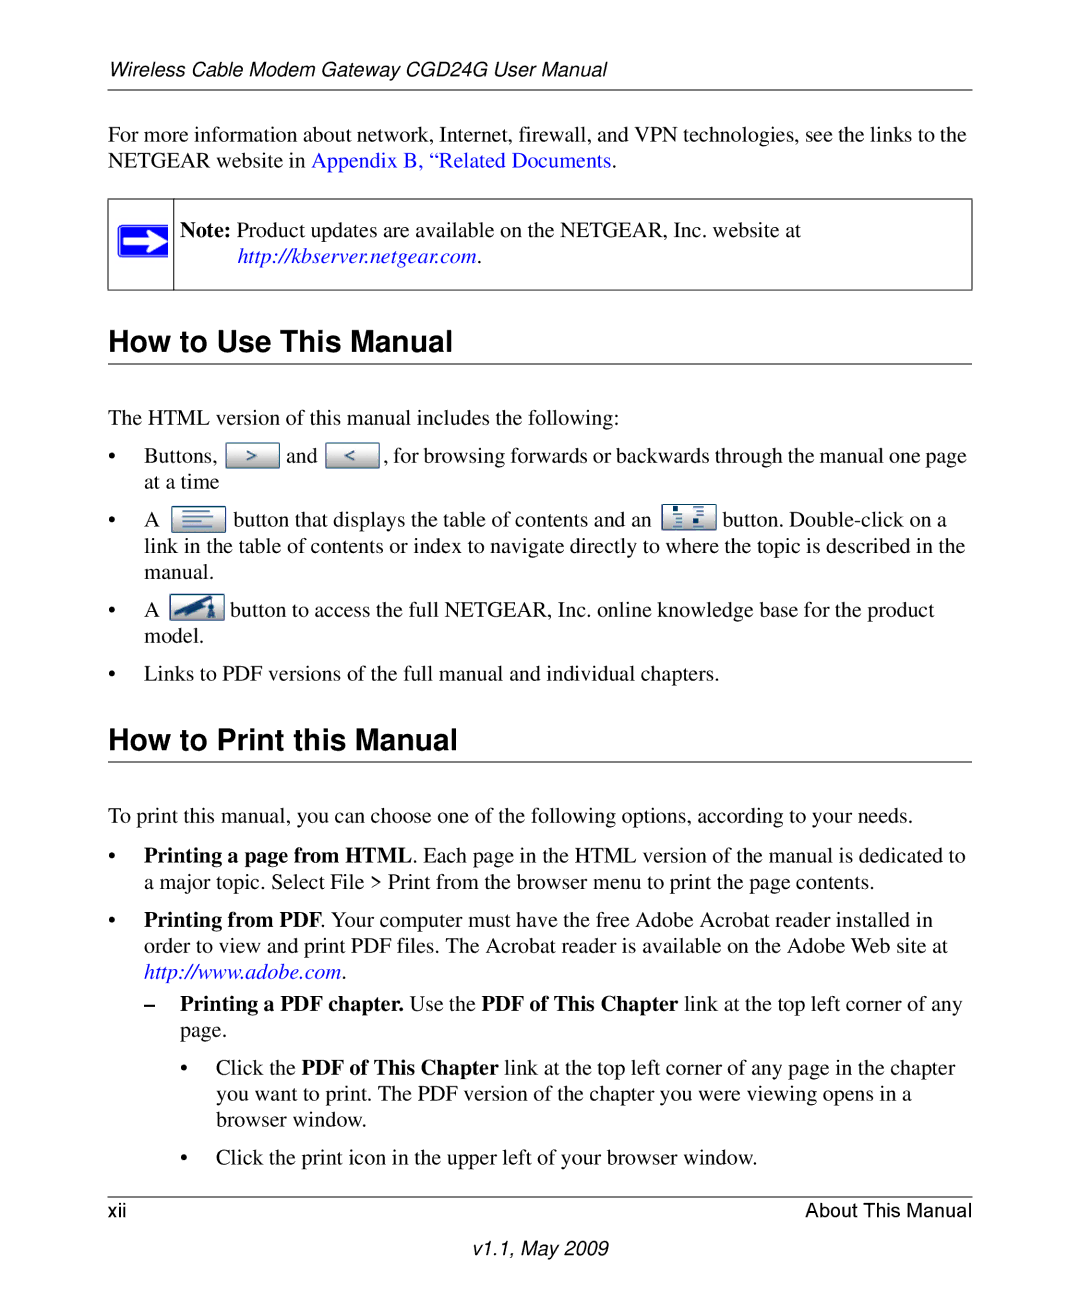 Gateway CGD24G user manual How to Use This Manual, How to Print this Manual 